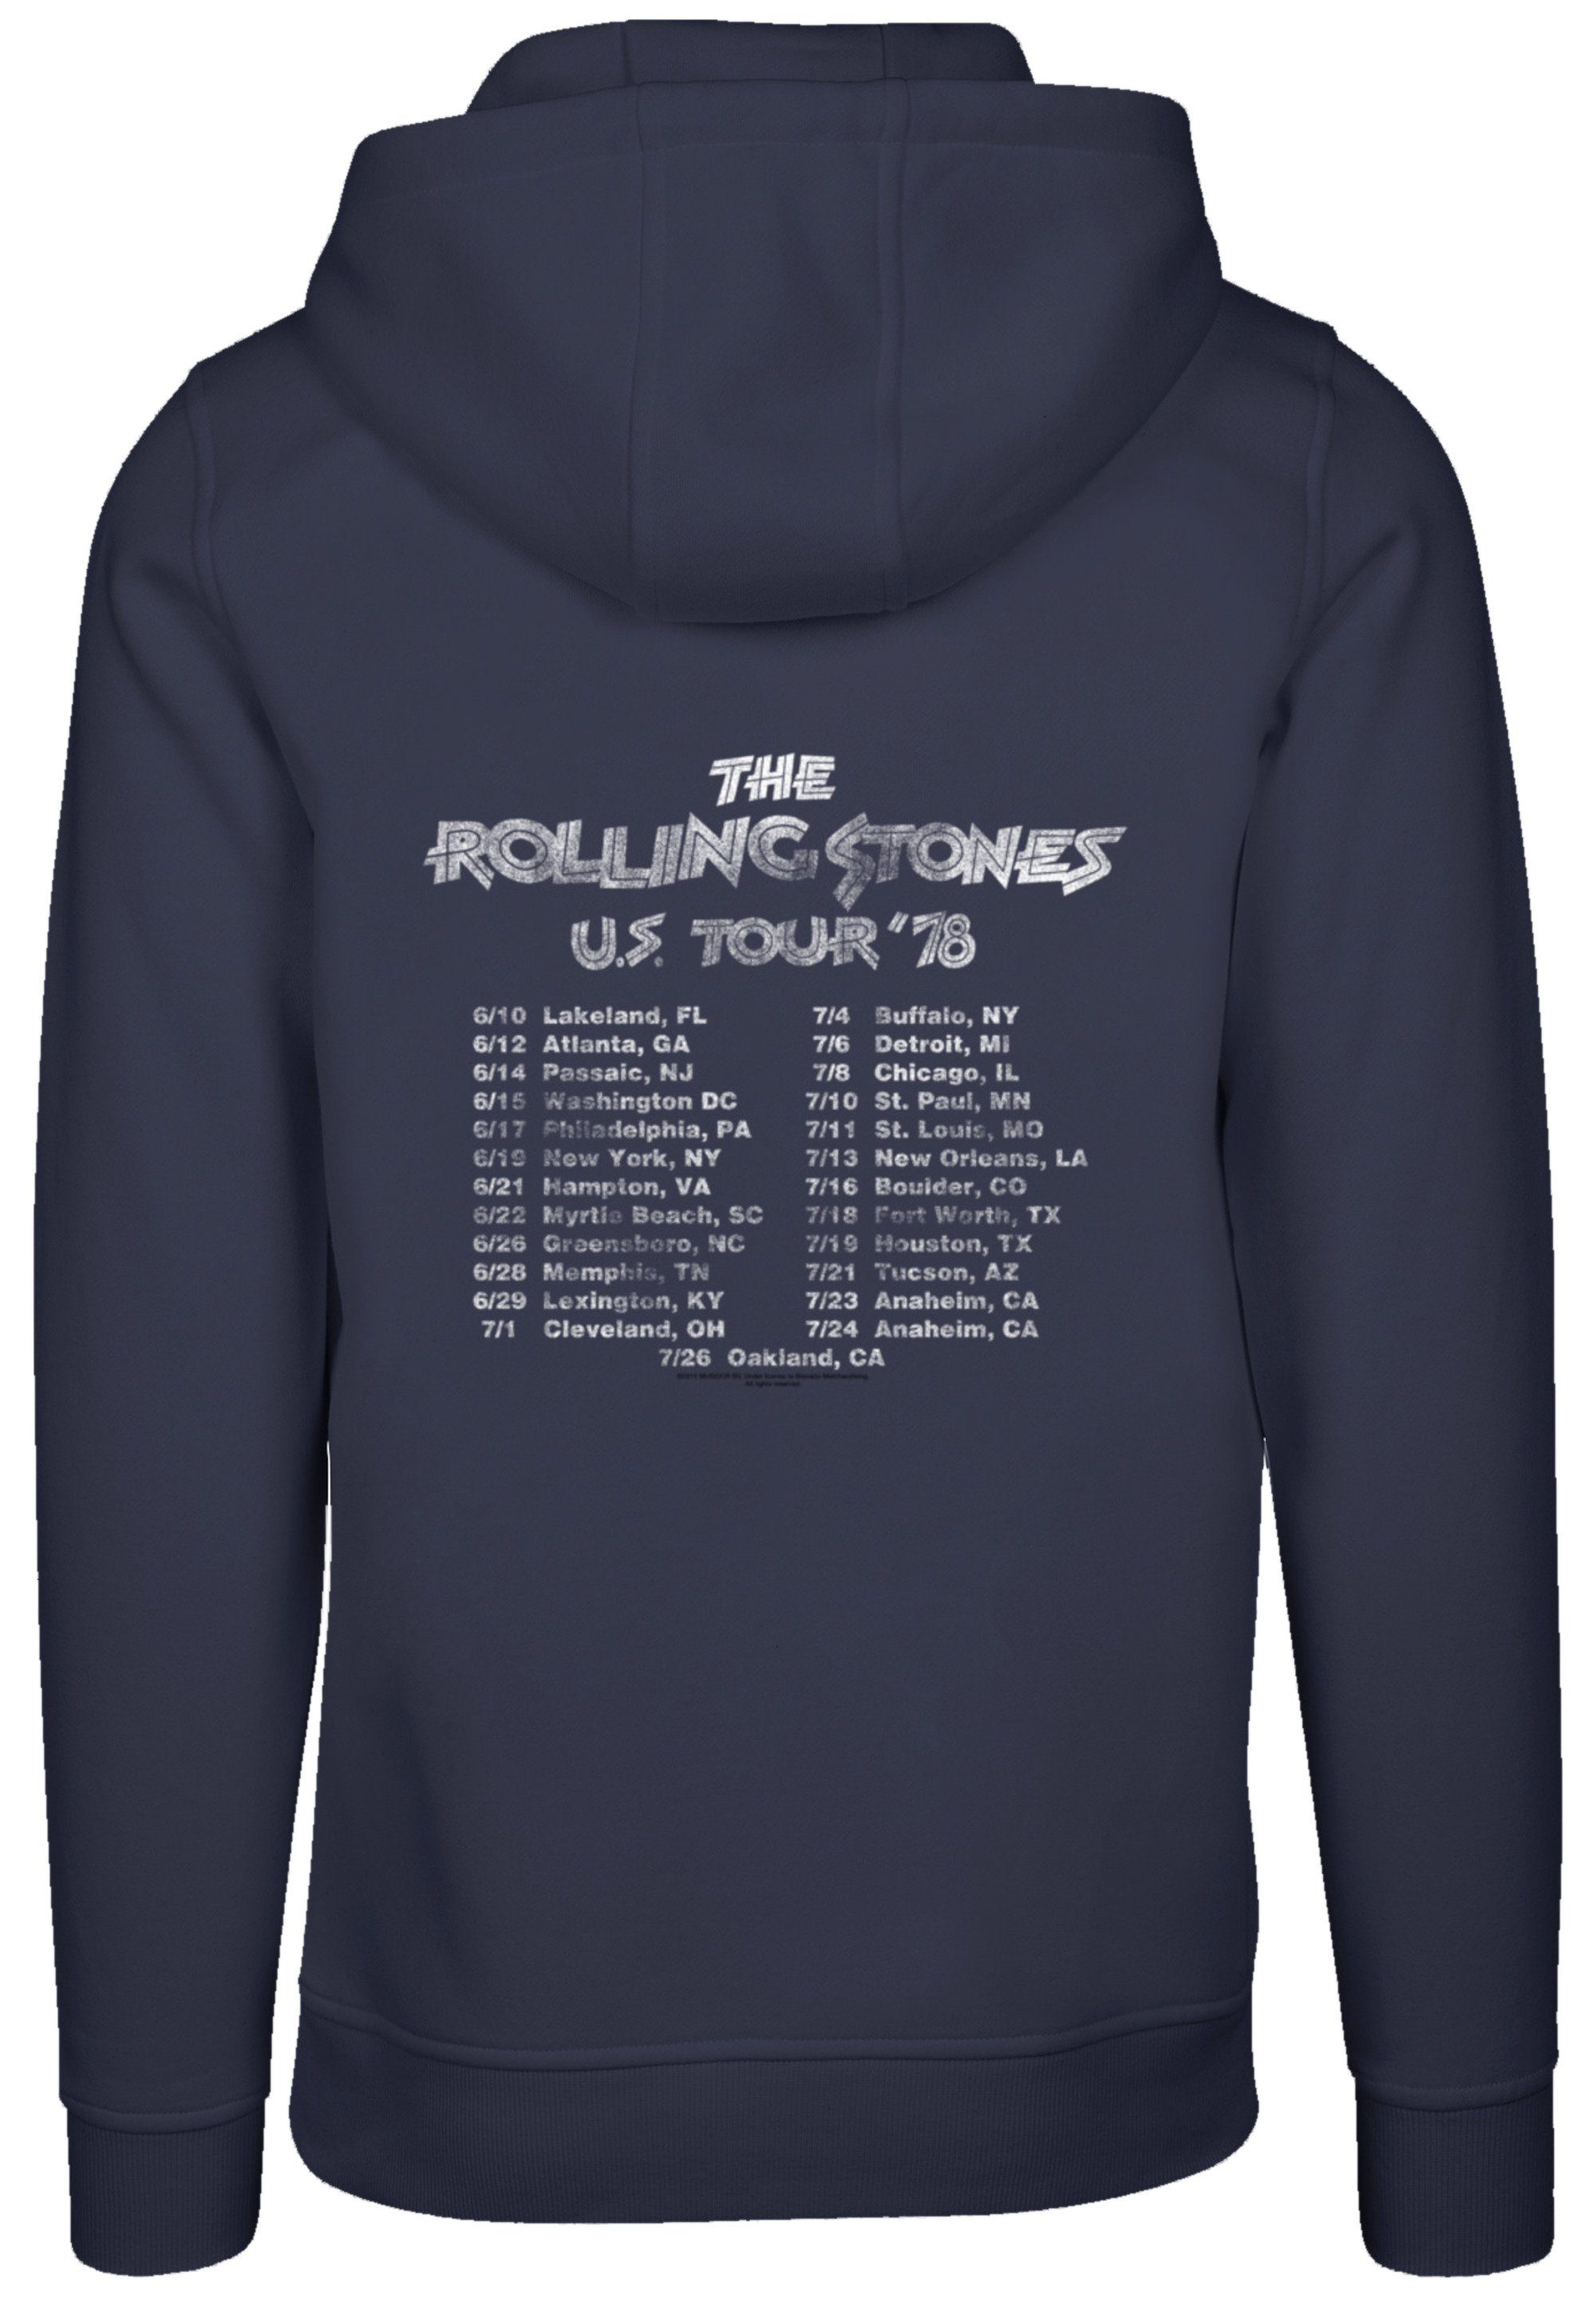 Rock Stones Tour Kapuzenpullover Hoodie, Band Rolling US Bequem The Warm, F4NT4STIC navy Musik